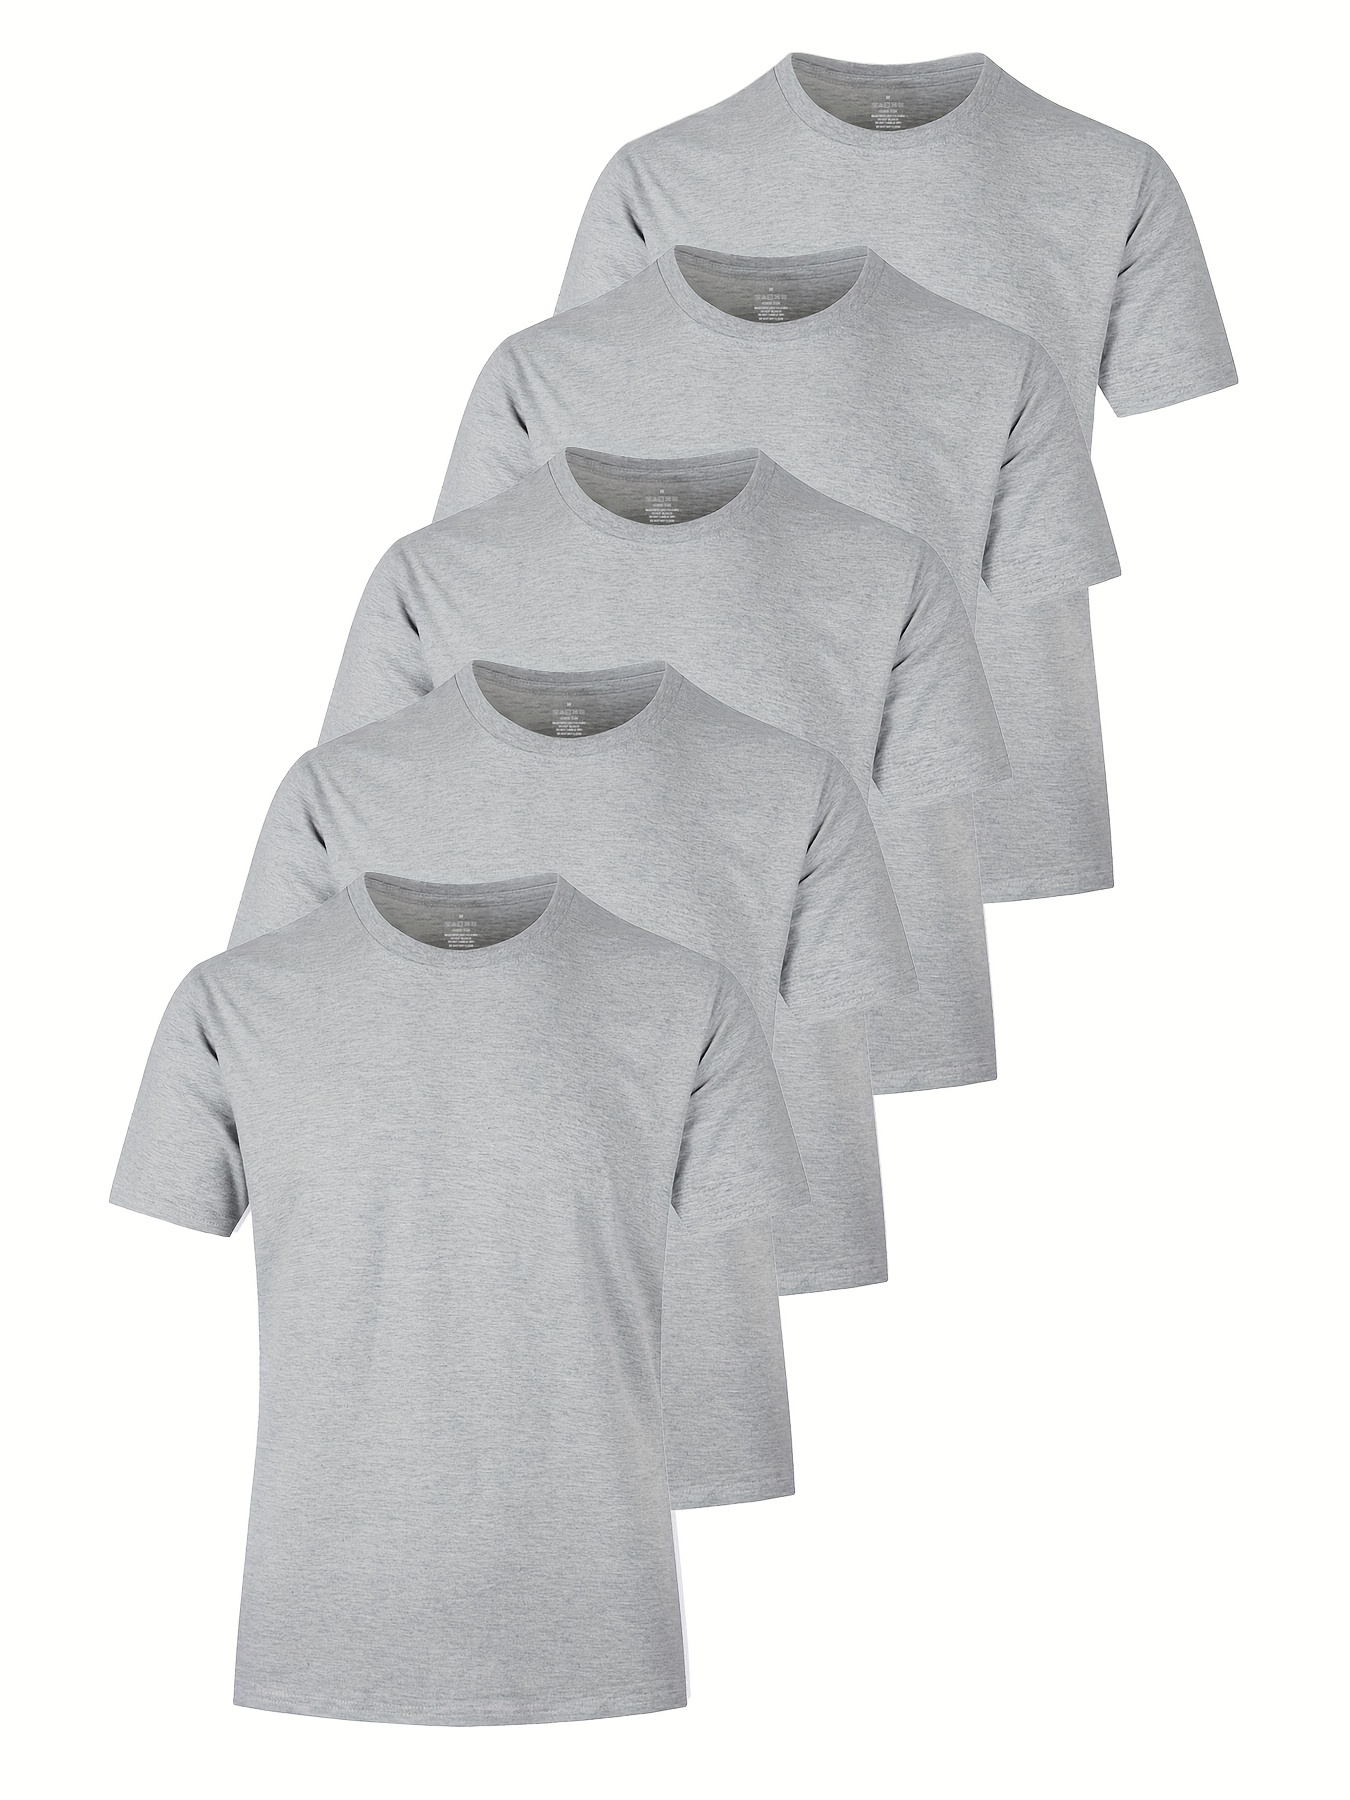 5pcs mens casual solid lightweight crew neck t shirts set for summer outdoor details 0